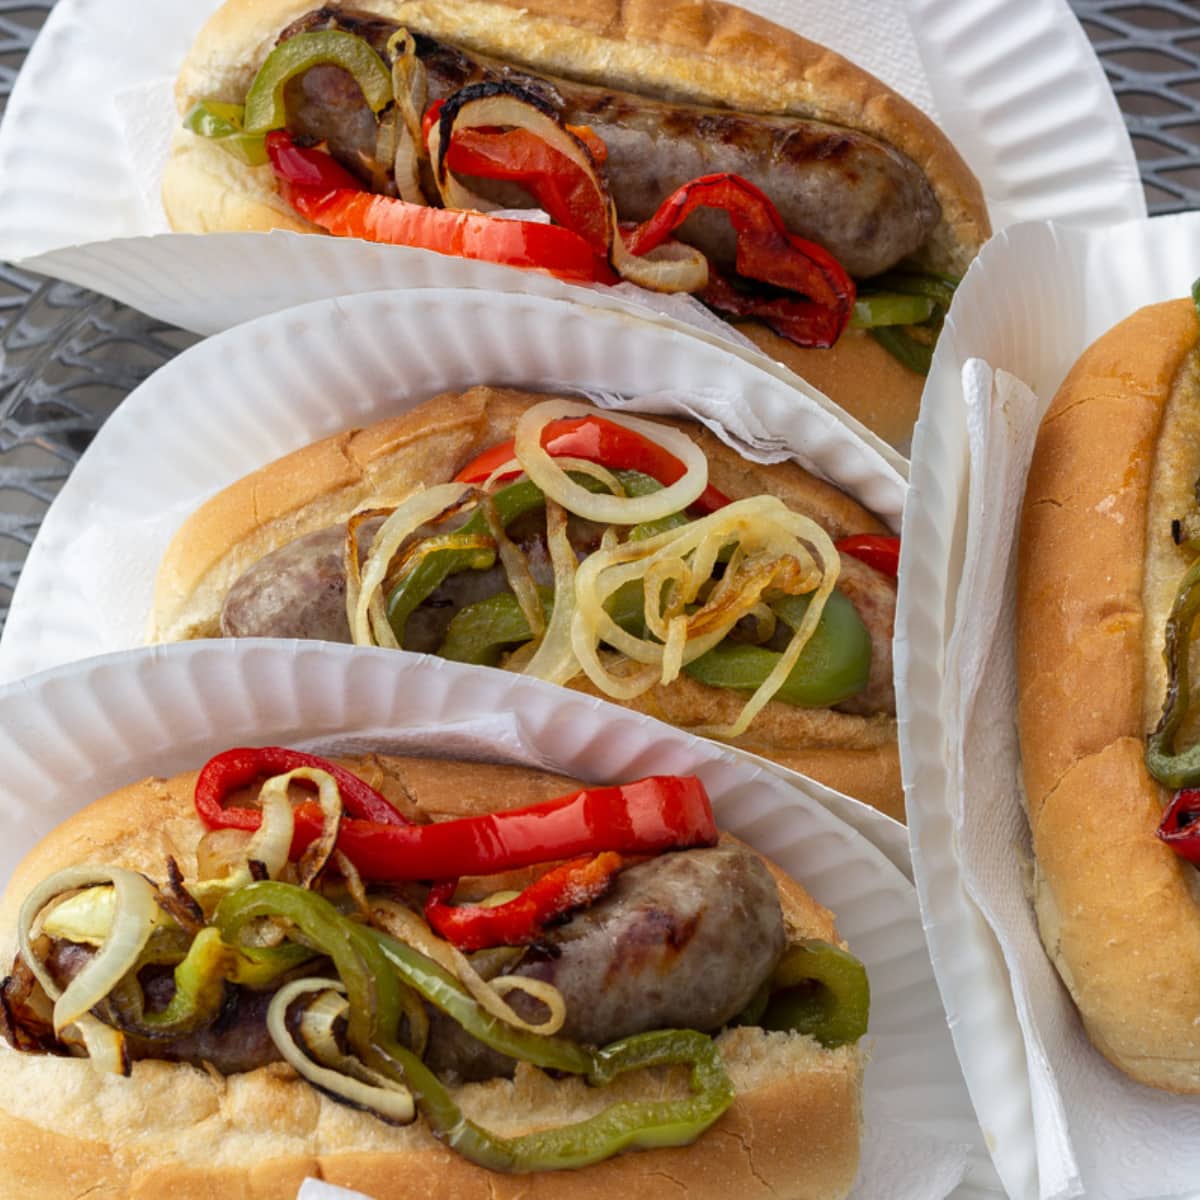 Four Buns holding sausage and grilled peppers and onions.